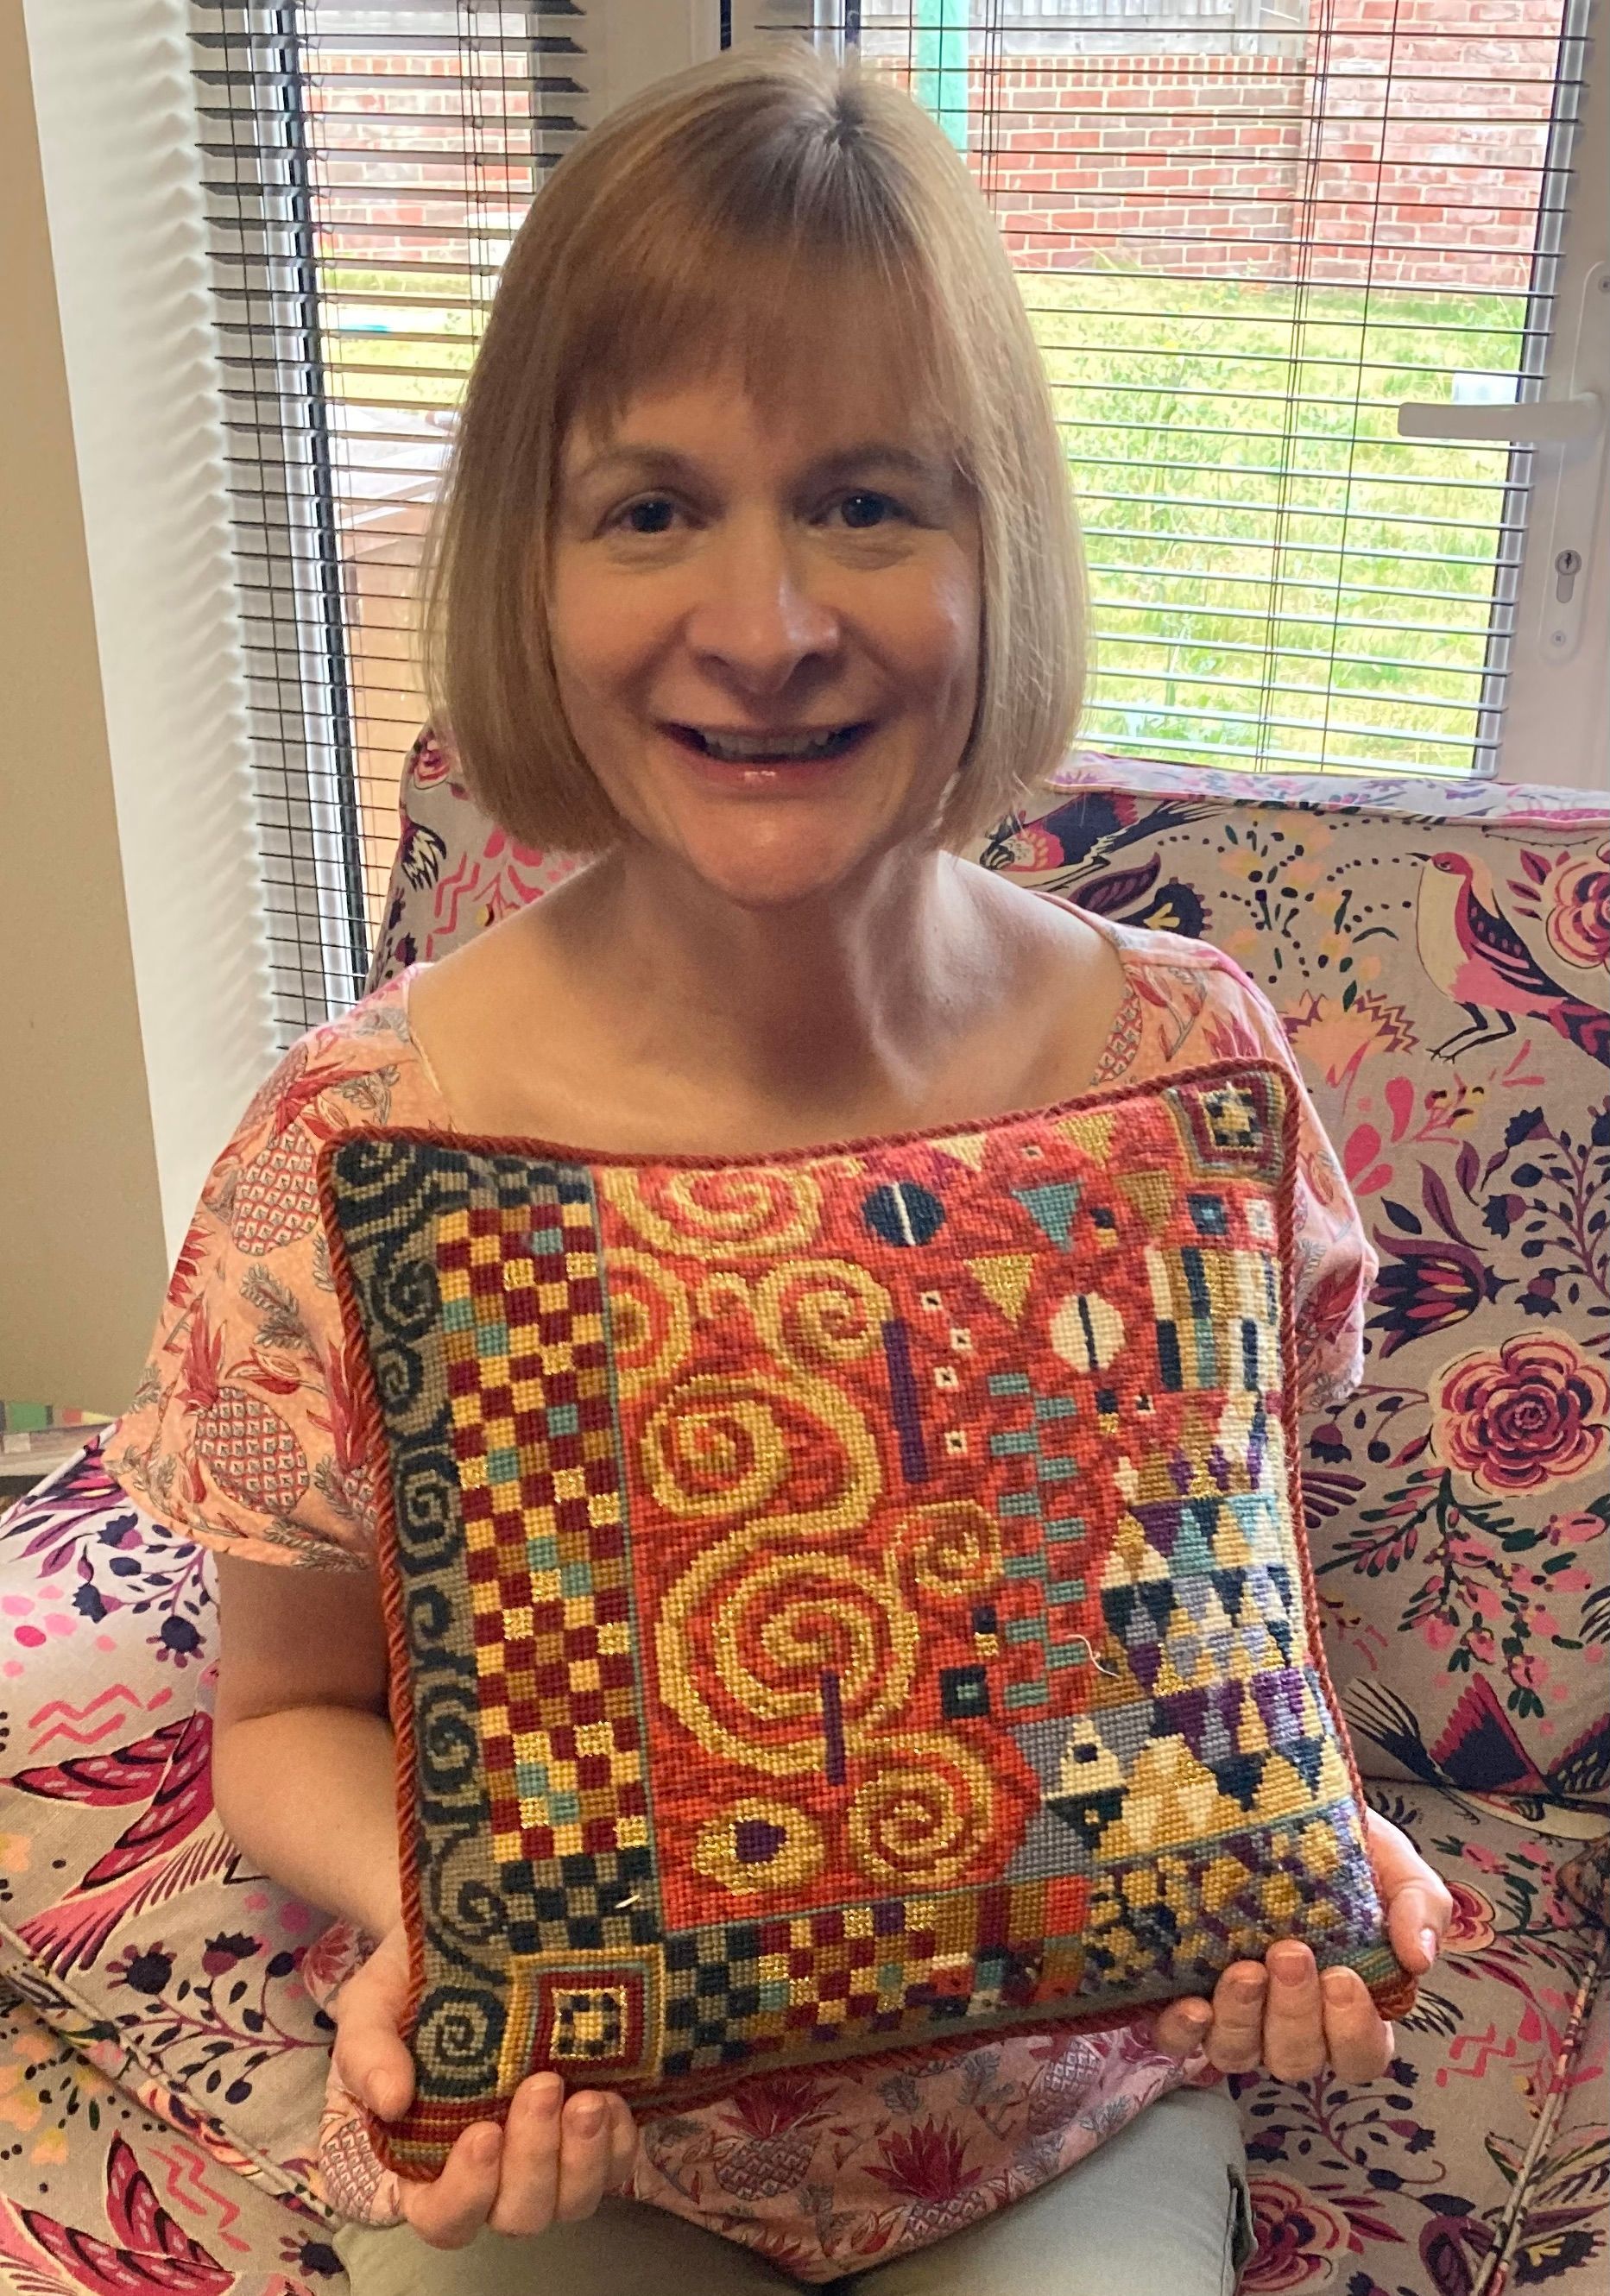 Woman sitting on a sofa holding a cross-stitched, handmade, colourful cushion. Cushion design based on the work of Gustav Klimt.